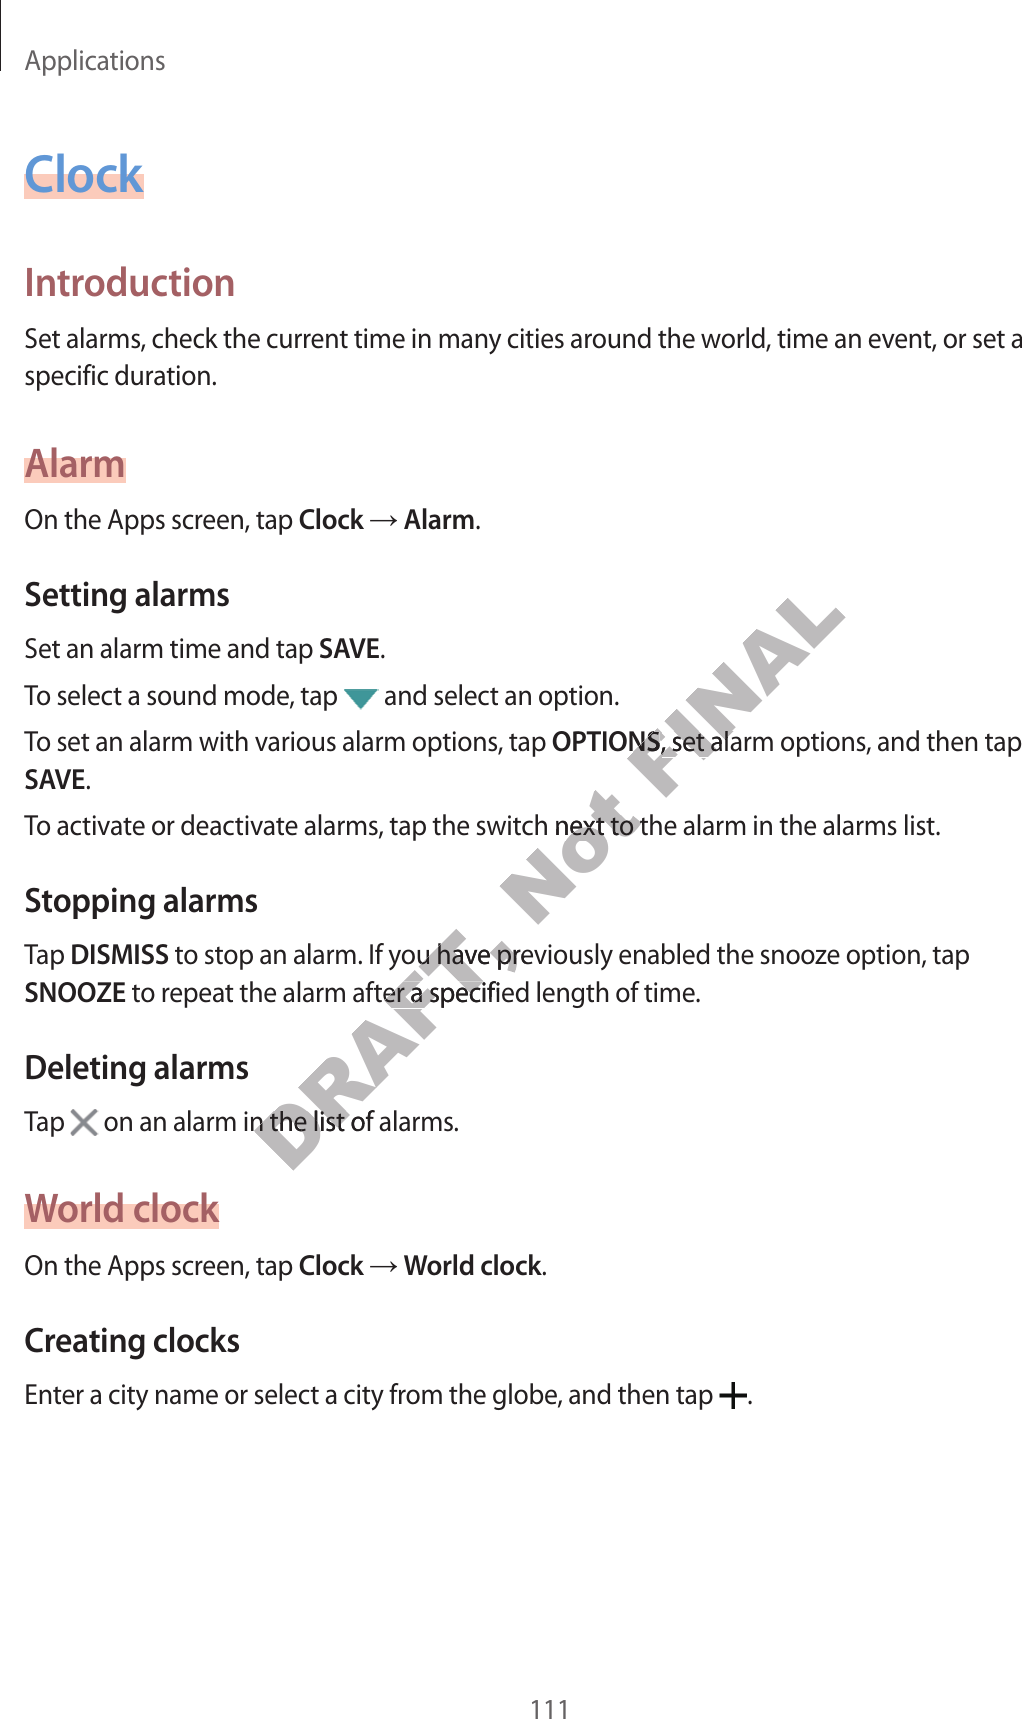 Applications111ClockIntroductionSet alarms, check the current time in man y cities ar ound the w orld , time an ev ent, or set a specific duration.AlarmOn the Apps screen, tap Clock  Alarm.Setting alarmsSet an alarm time and tap SAVE.To select a sound mode, tap   and select an option.To set an alarm with various alarm options, tap OPTIONS, set alarm options, and then tap SAVE.To activate or deactivate alarms, tap the switch ne xt to the alarm in the alarms list.Stopping alarmsTap DISMISS to stop an alarm. If you hav e pr eviously enabled the snoo z e option, tap SNOOZE to repea t the alarm after a specified length of time.Deleting alarmsTap   on an alarm in the list of alarms.World clockOn the Apps screen, tap Clock  World clock.Crea ting clocksEnter a city name or select a city from the globe , and then tap  .DRAFT,  to stop an alarm. If you hav e pr eviously enabled the snoo z e option, tap DRAFT,  to stop an alarm. If you hav e pr eviously enabled the snoo z e option, tap DRAFT,  to repea t the alarm after a specified length of time.DRAFT,  to repea t the alarm after a specified length of time. on an alarm in the list of alarms.DRAFT,  on an alarm in the list of alarms.Not To activate or deactivate alarms, tap the switch ne xt to the alarm in the alarms list.Not To activate or deactivate alarms, tap the switch ne xt to the alarm in the alarms list.FINALOPTIONSFINALOPTIONS, set alarm options, and then tap FINAL, set alarm options, and then tap 